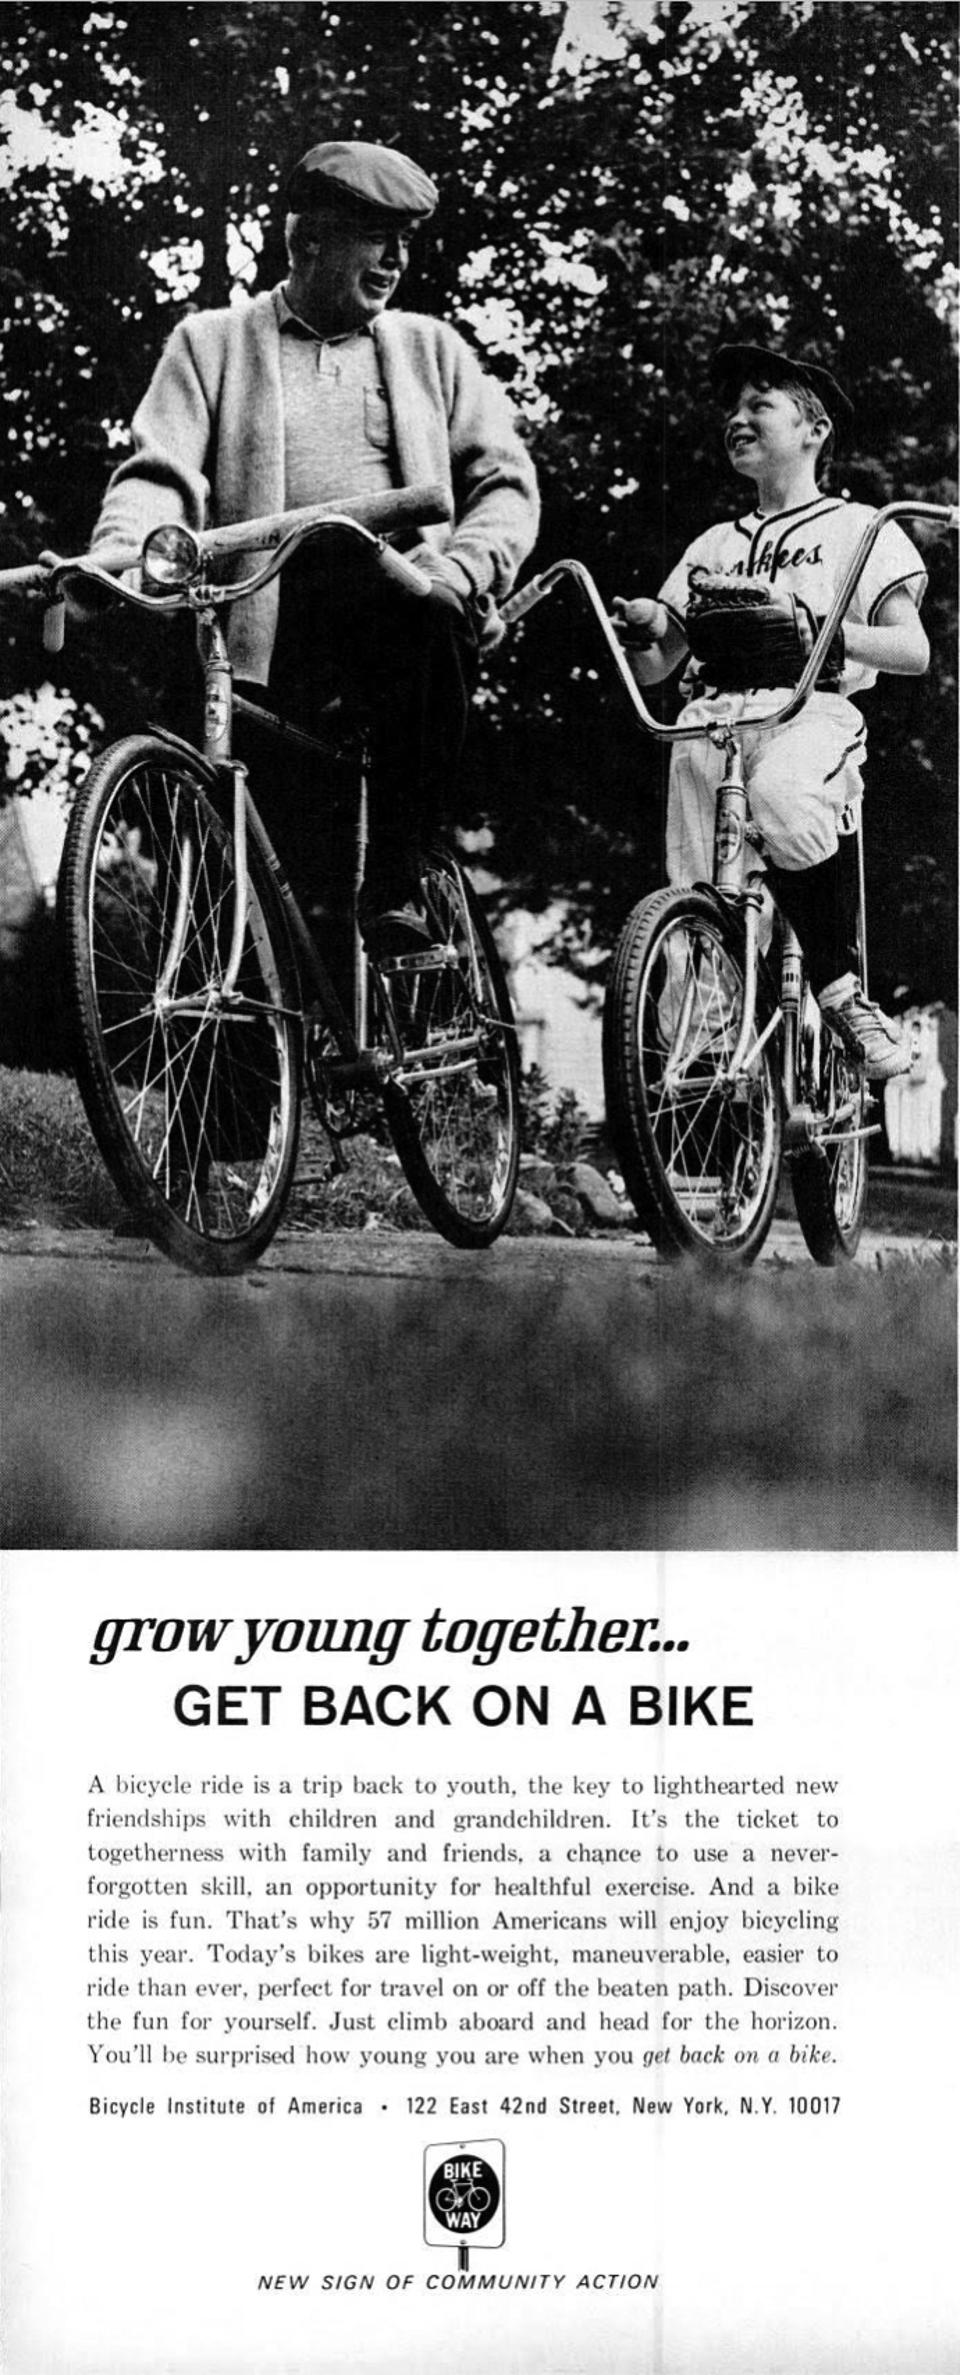 newspaper advert from the Bicycle Institute of America